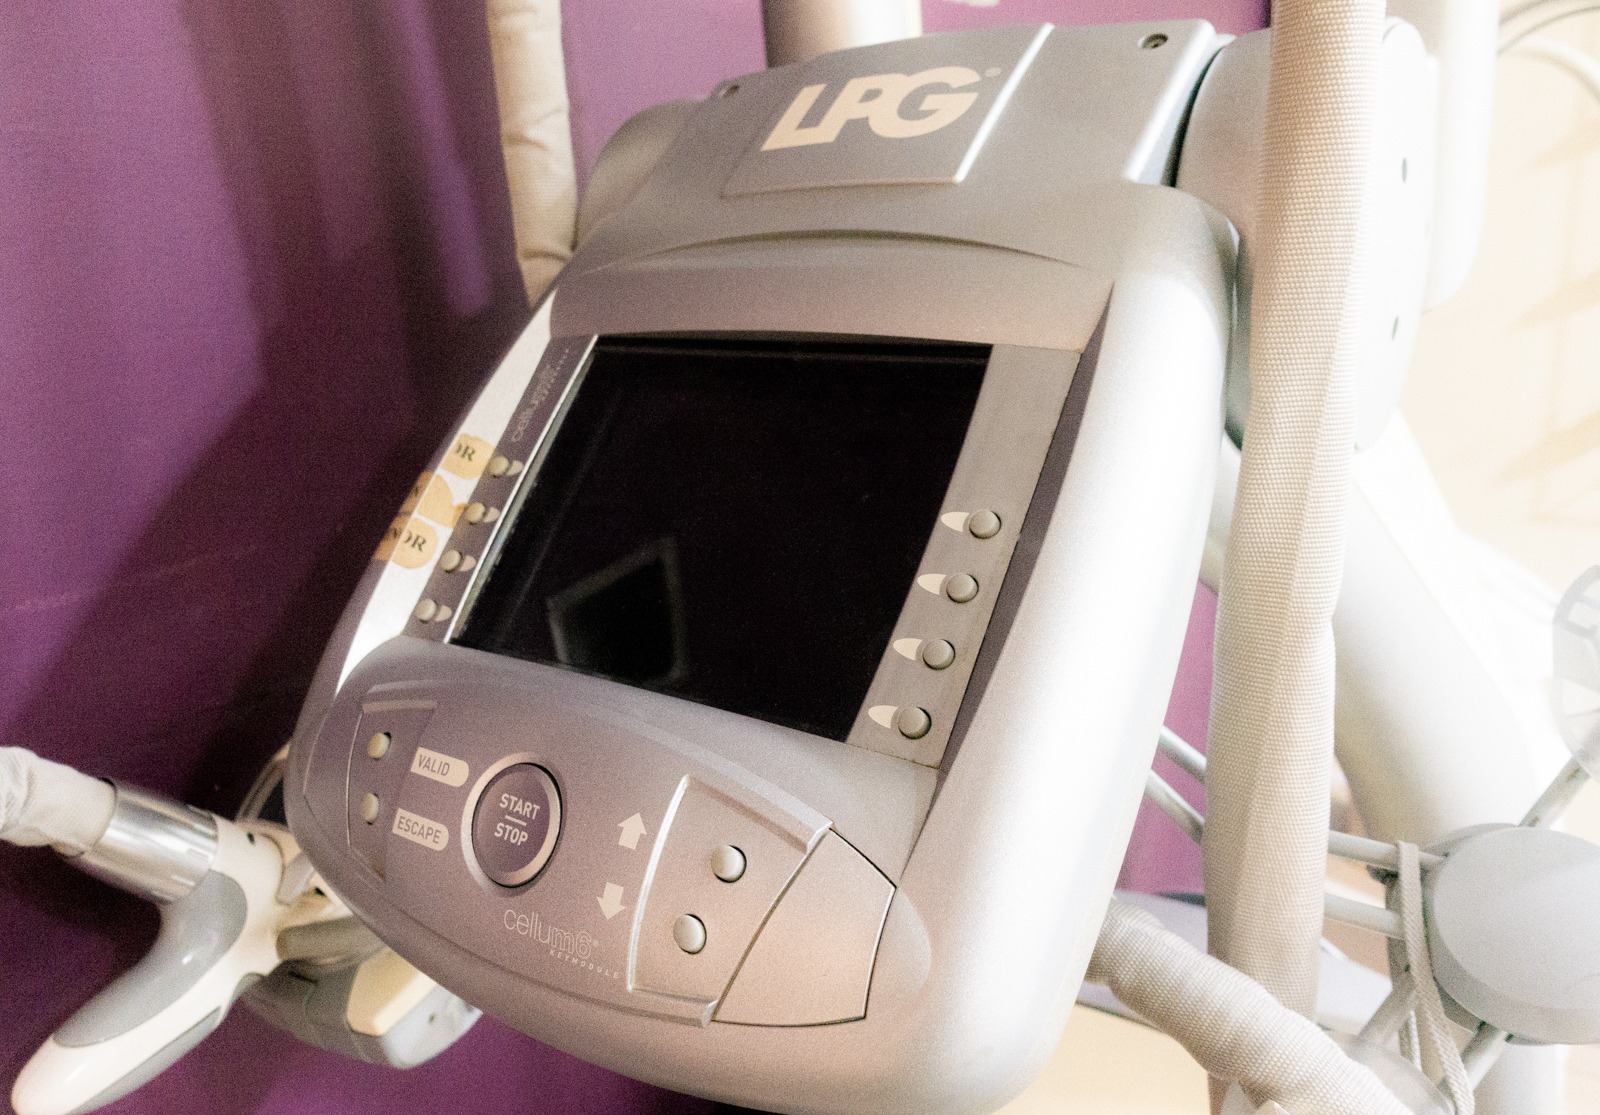 Endermologie treatments at Transforma Cosmetic Clinic